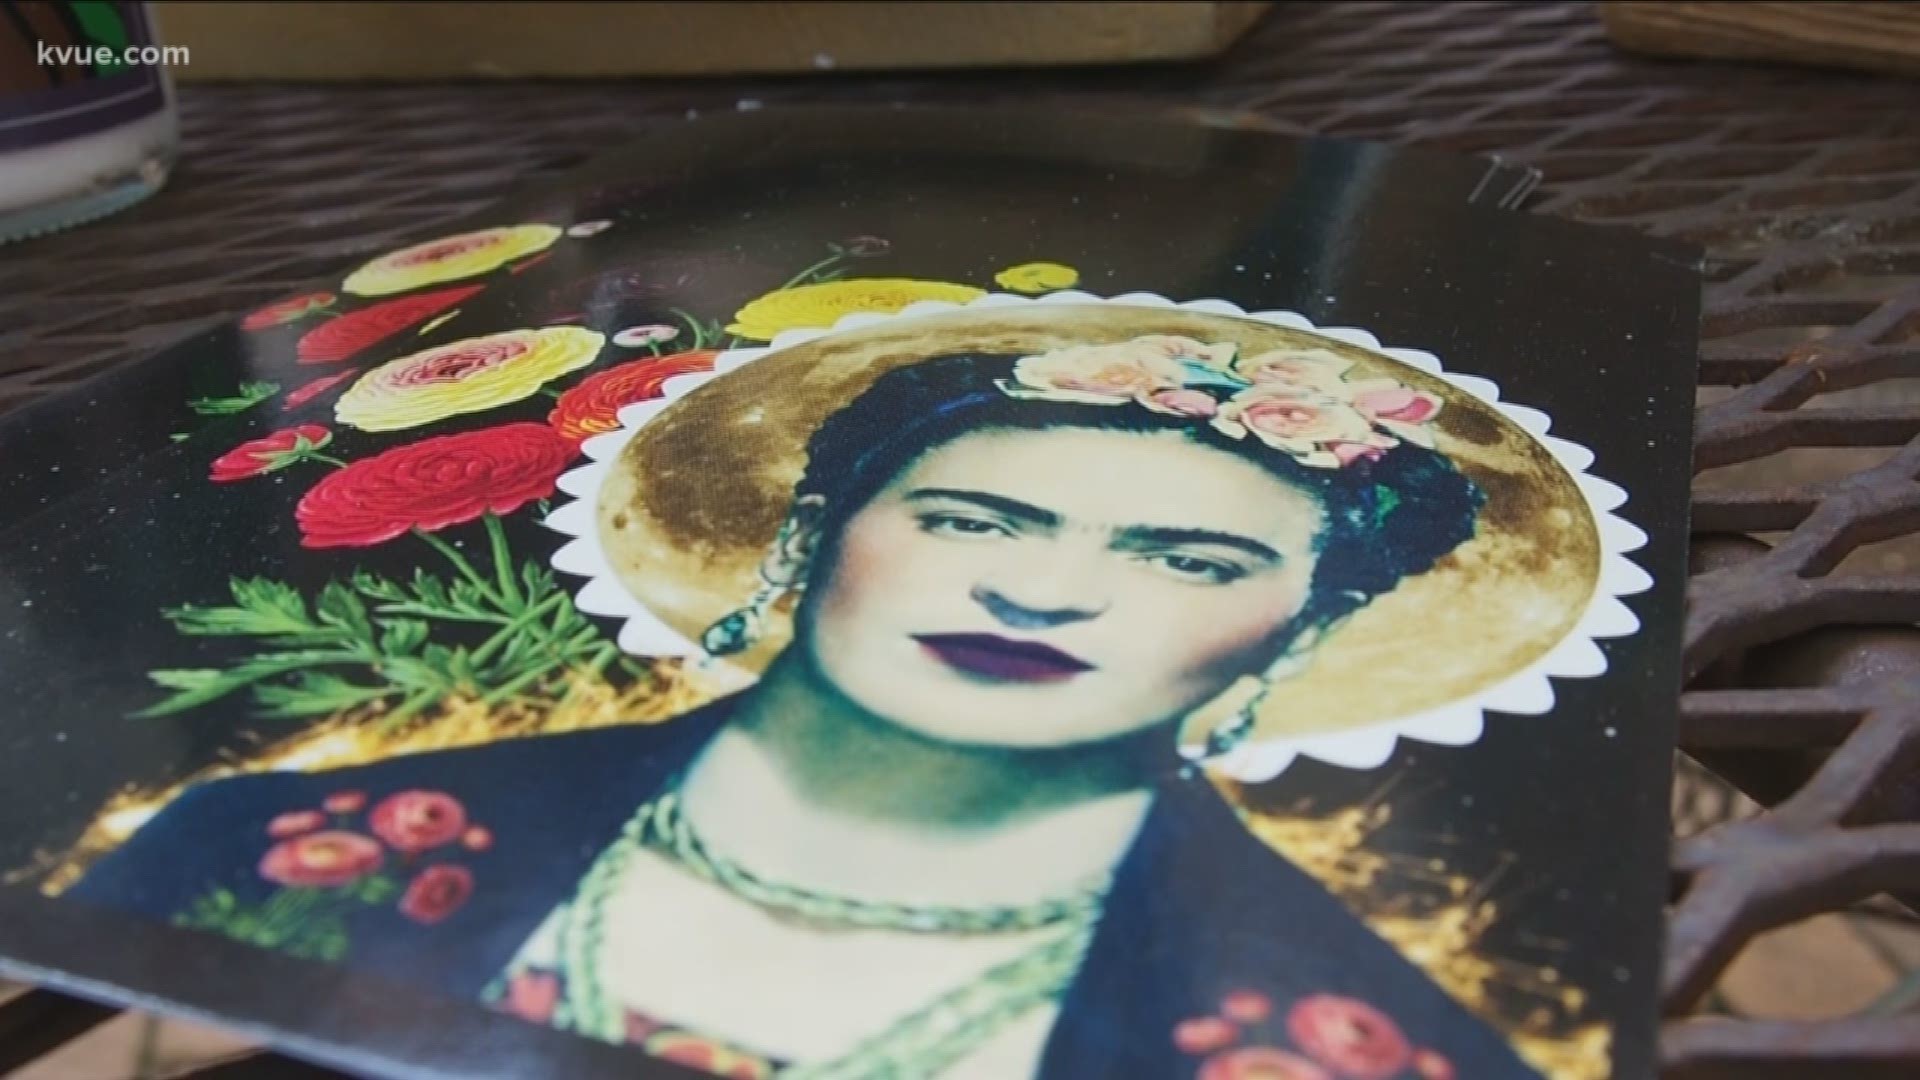 "Frida Friday ATX" is a monthly market that takes its name from artist Frida Khalo. The market celebrates and supports women of color.